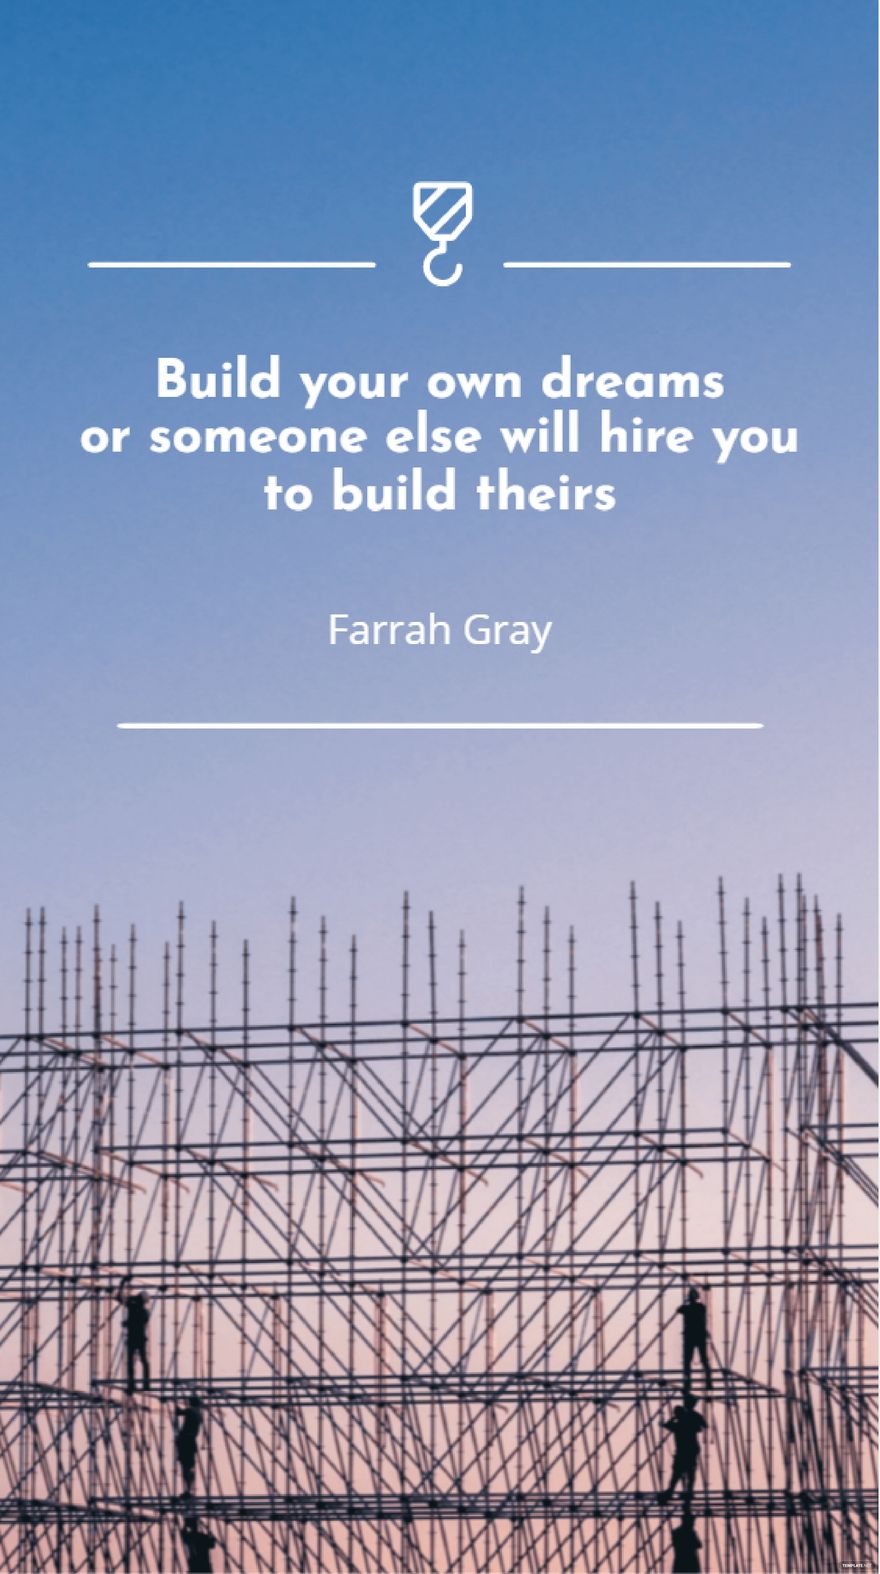 Farrah Gray - Build your own dreams or someone else will hire you to build theirs